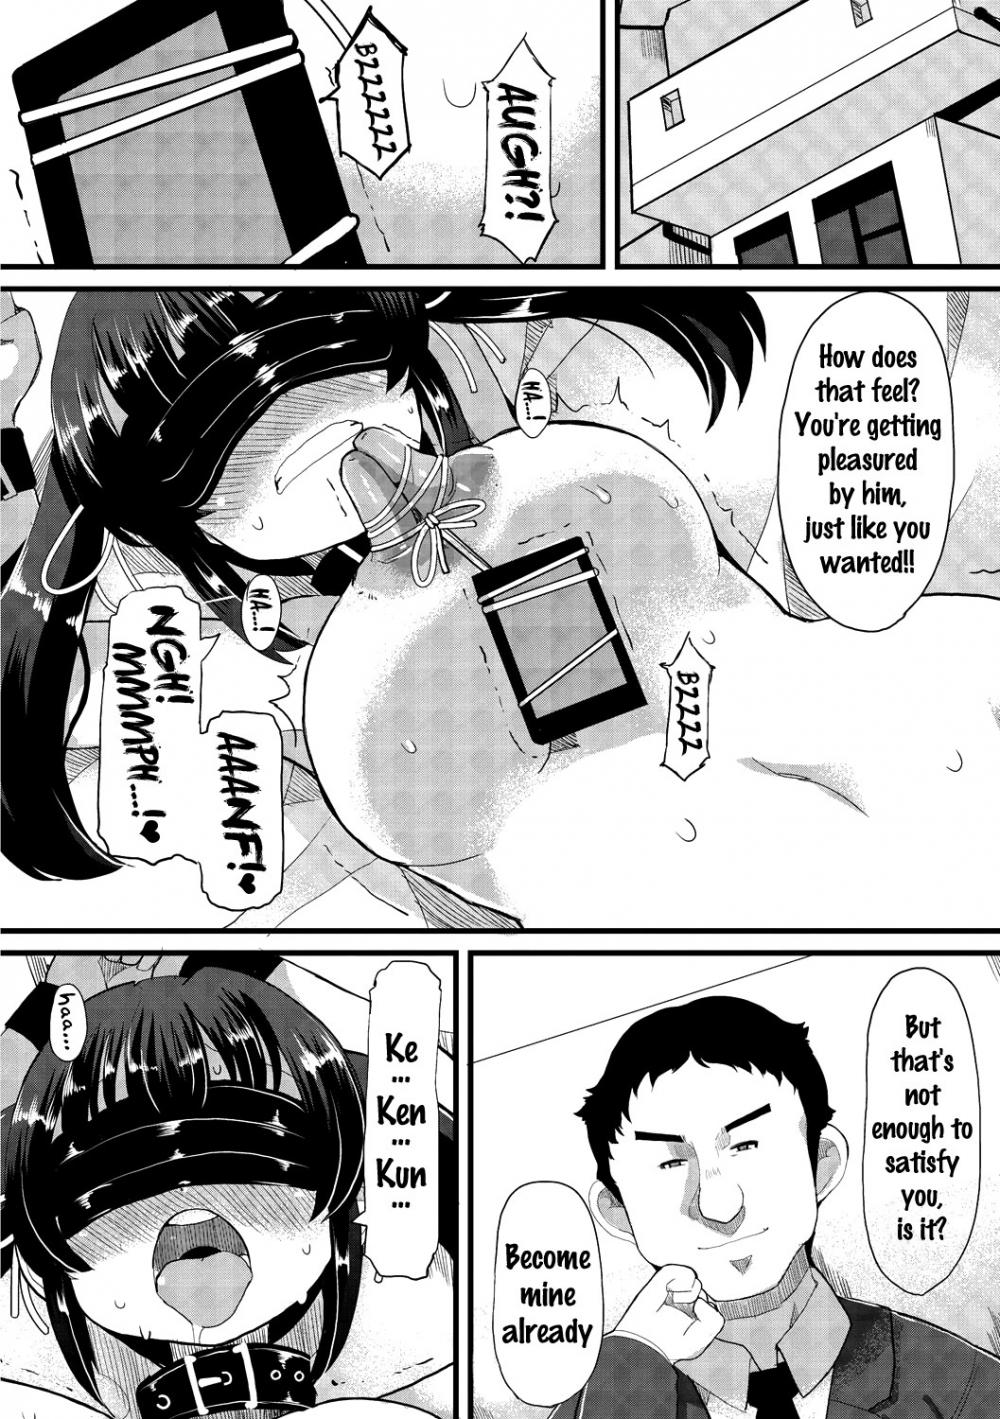 Hentai Manga Comic-A Large Breasted Honor Student Makes The Big Change to Perverted Masochist-Chapter 4-2